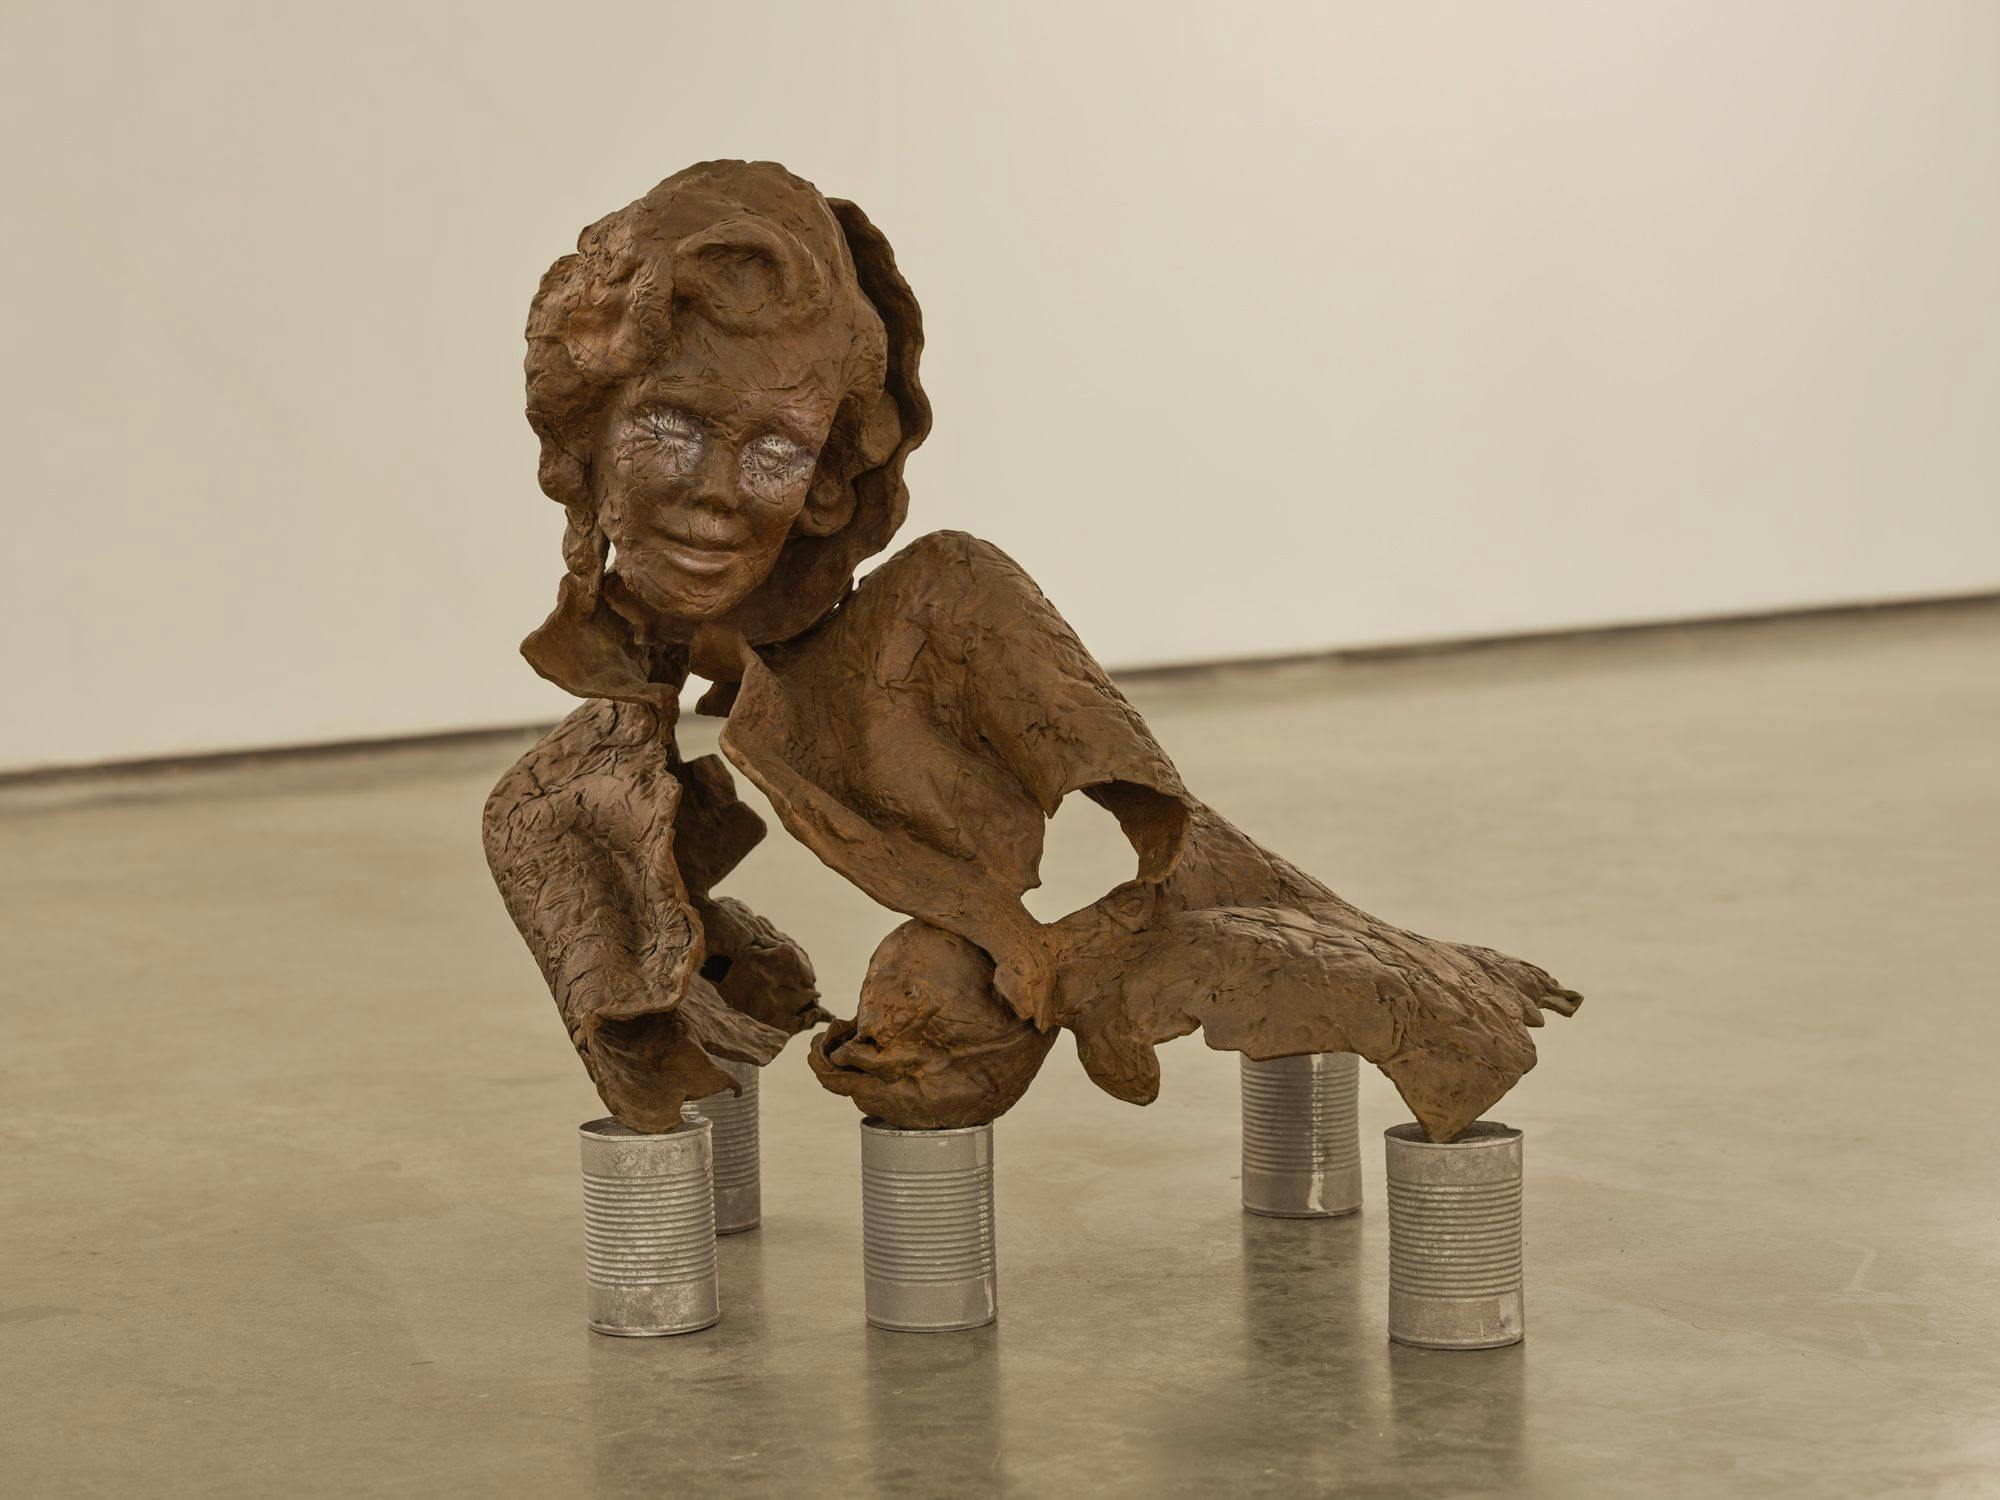 A bronze sculpture of a partial human figure sits on aluminum cans on a concrete floor. The sculpture appears to be disintegrating.